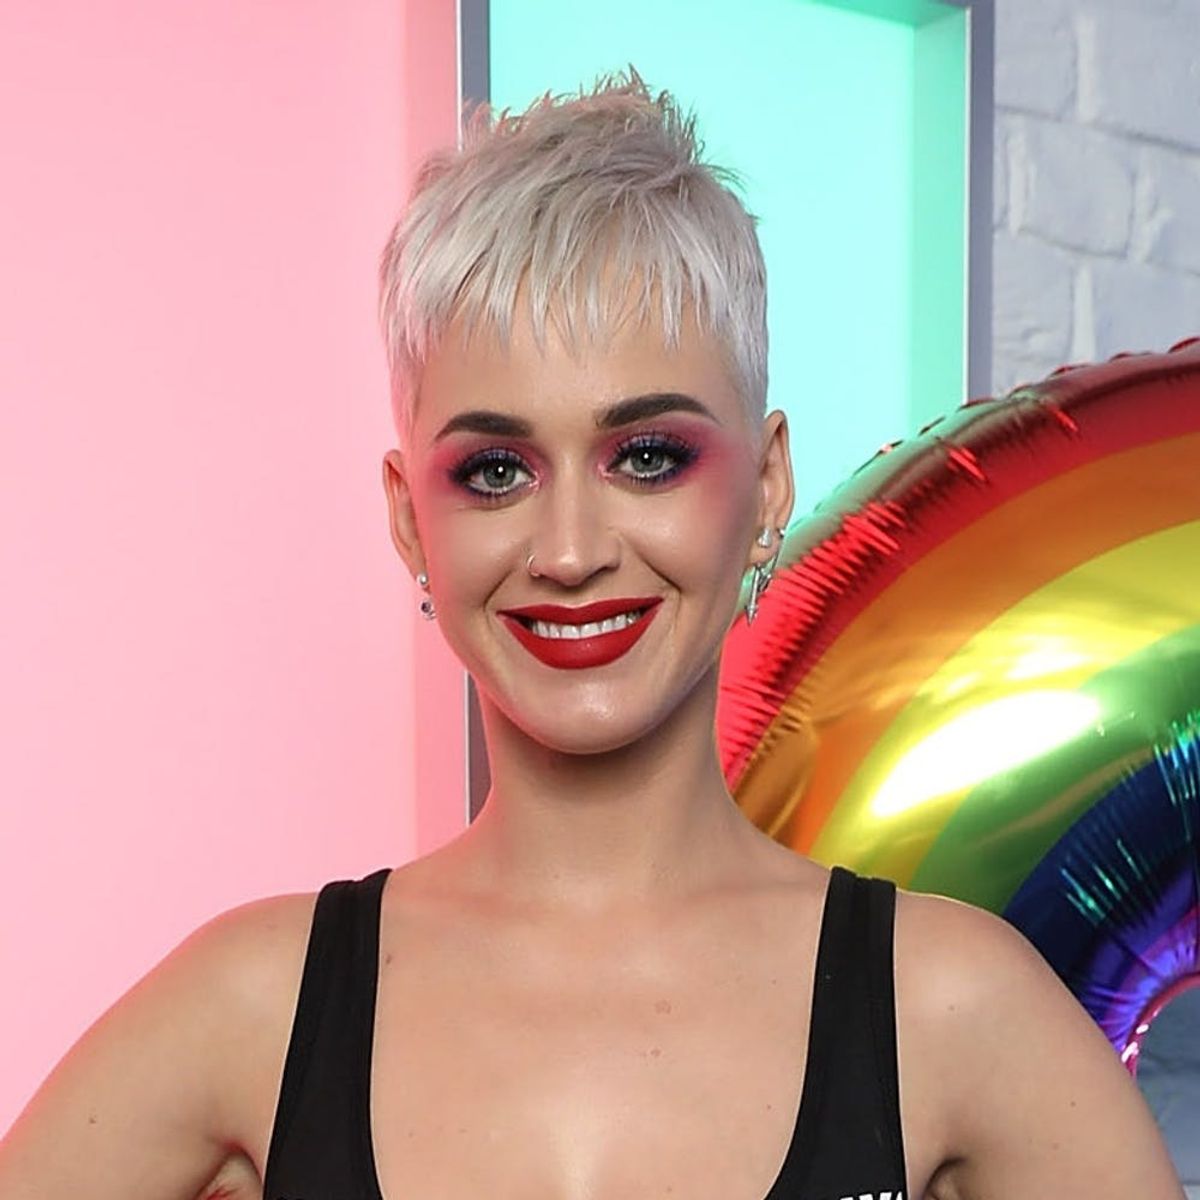 Katy Perry Just Wore the Most Naked Bodysuit We’ve Seen All Year